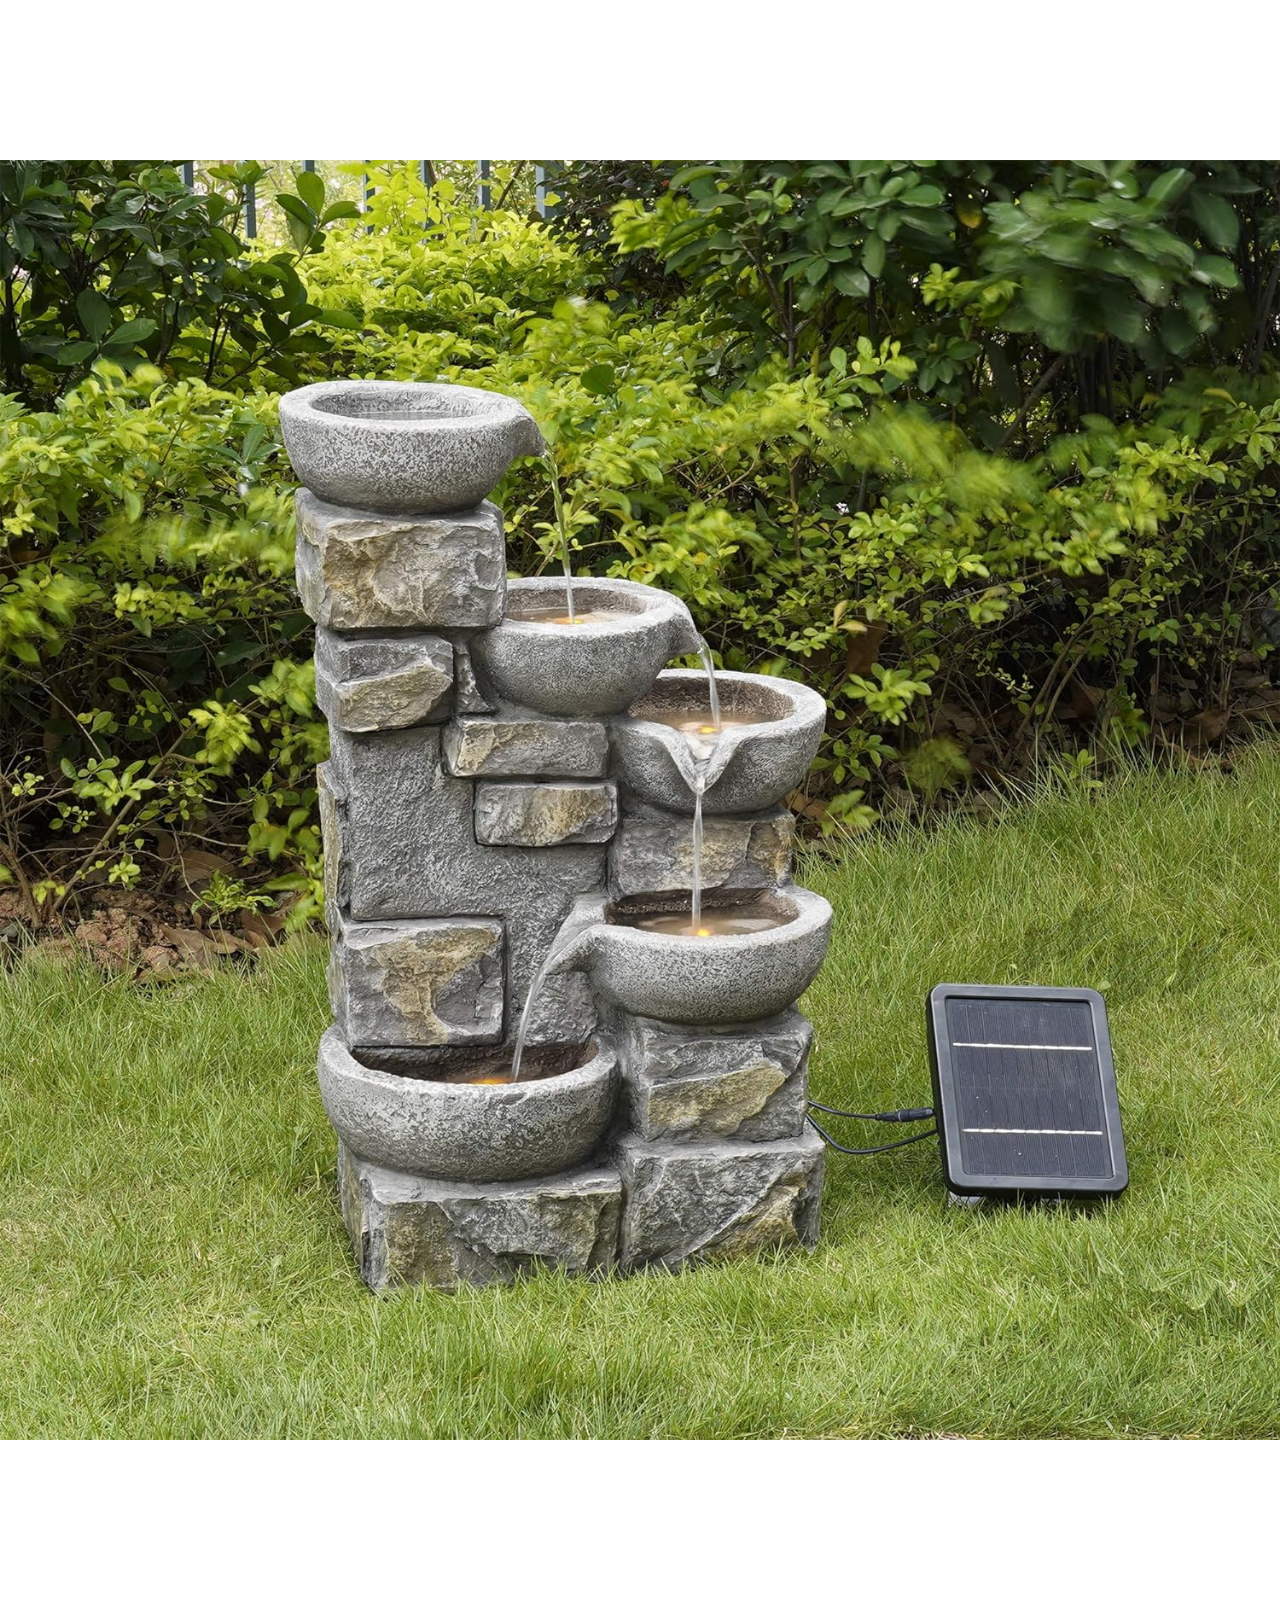 Jet - Solar 5 Tier Bowls Lighting Water Feature Fountain